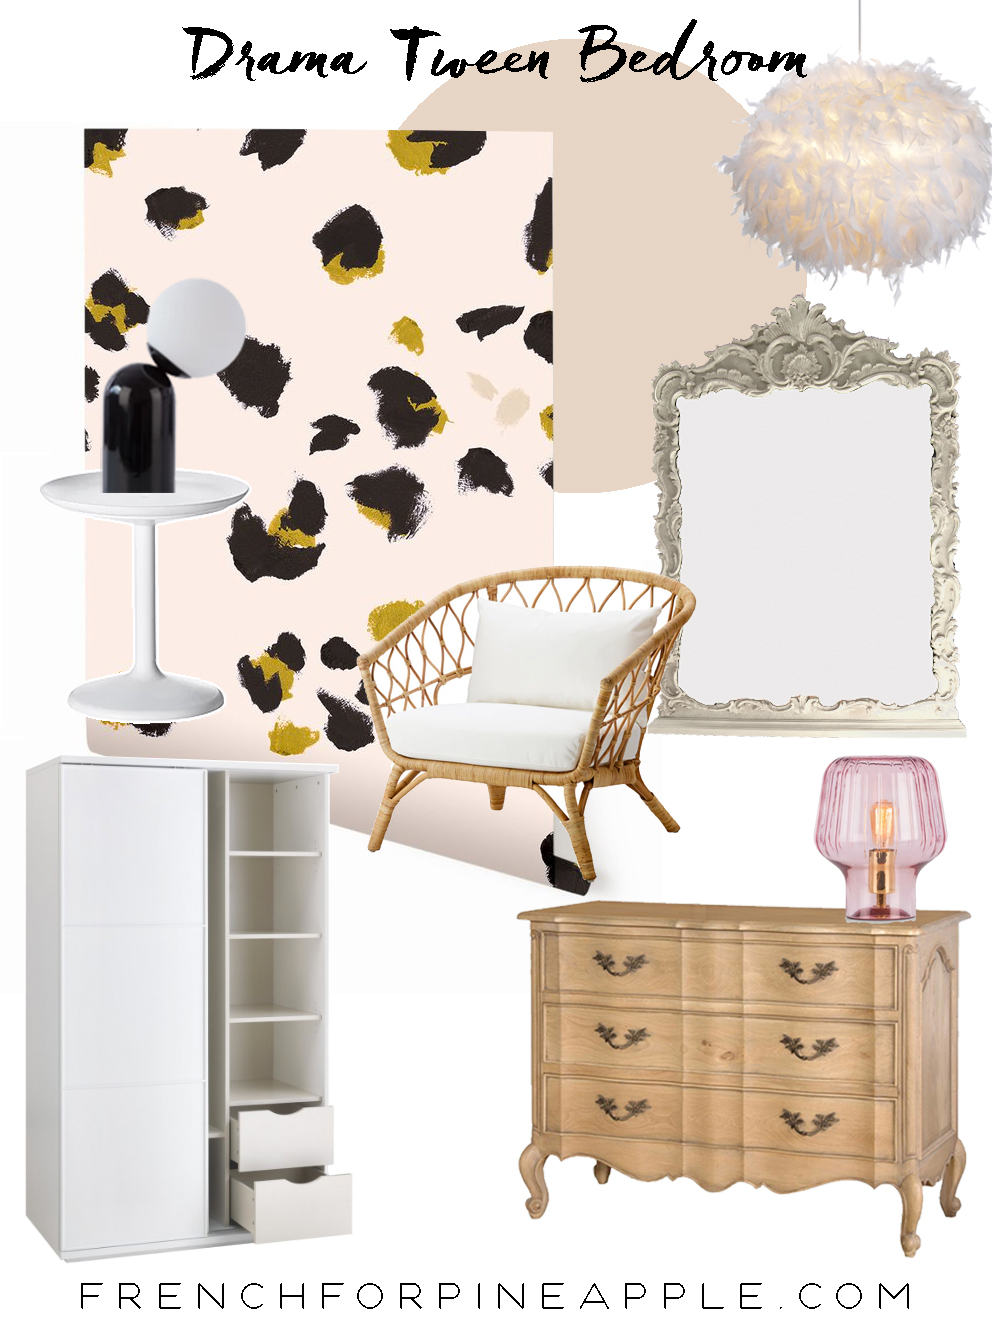 French For Pineapple - Drama Tween Bedroom Makeover - Moodboard